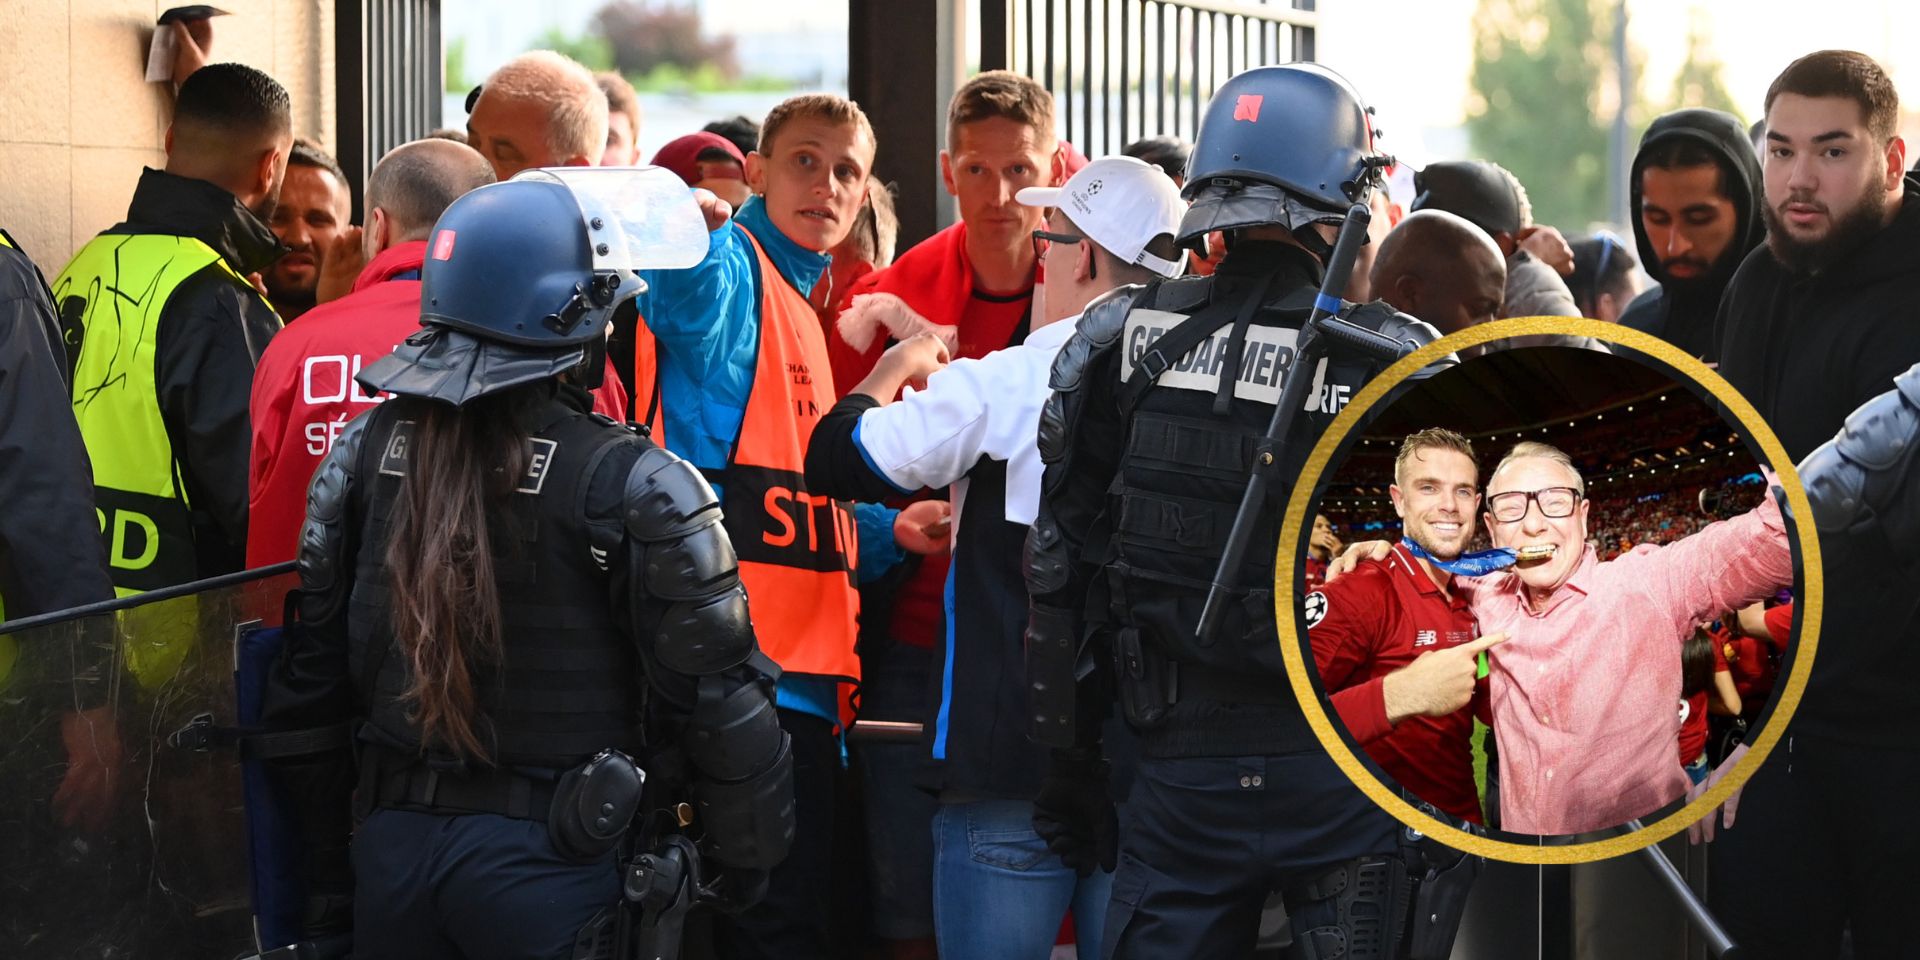 Henderson’s father ‘done’ with attending football matches after ‘horrific’ Paris scenes